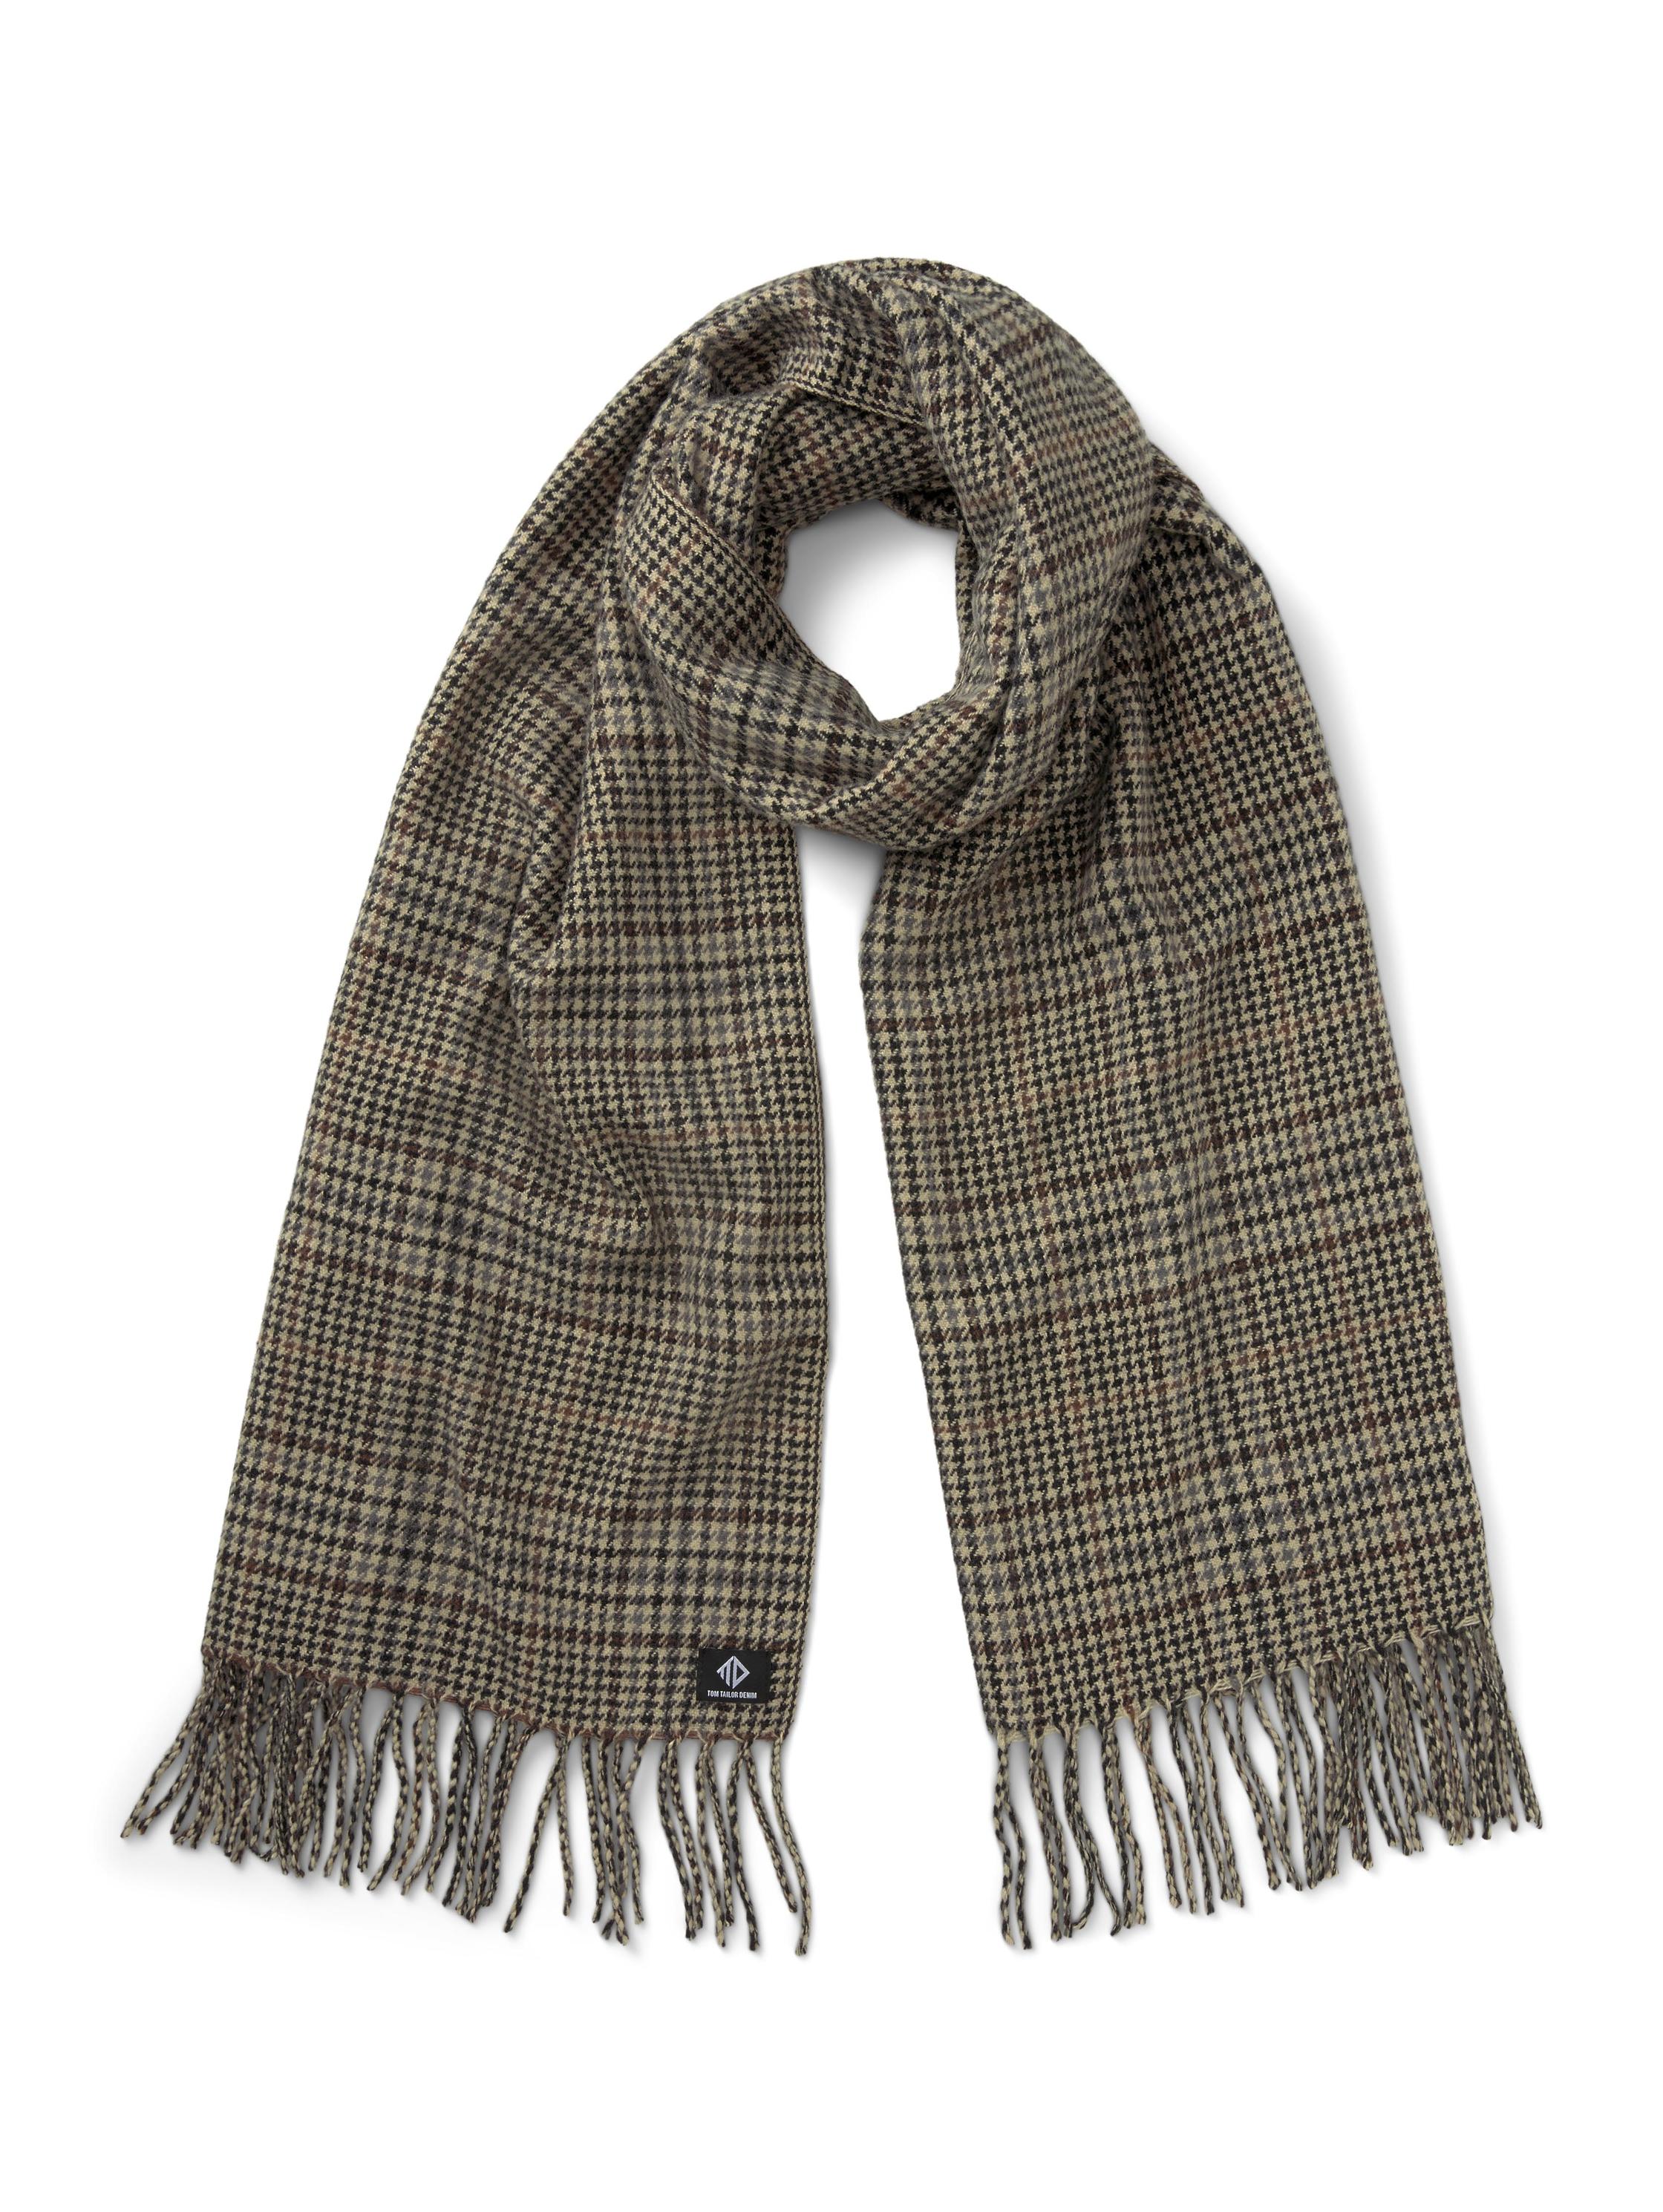 woven scarf check, brown beige check